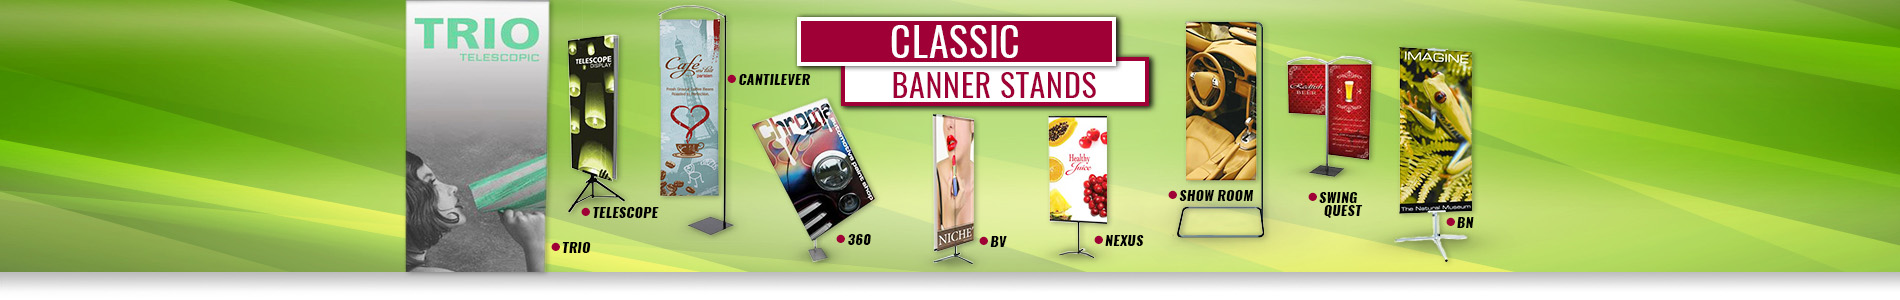 Classic Banner Stands